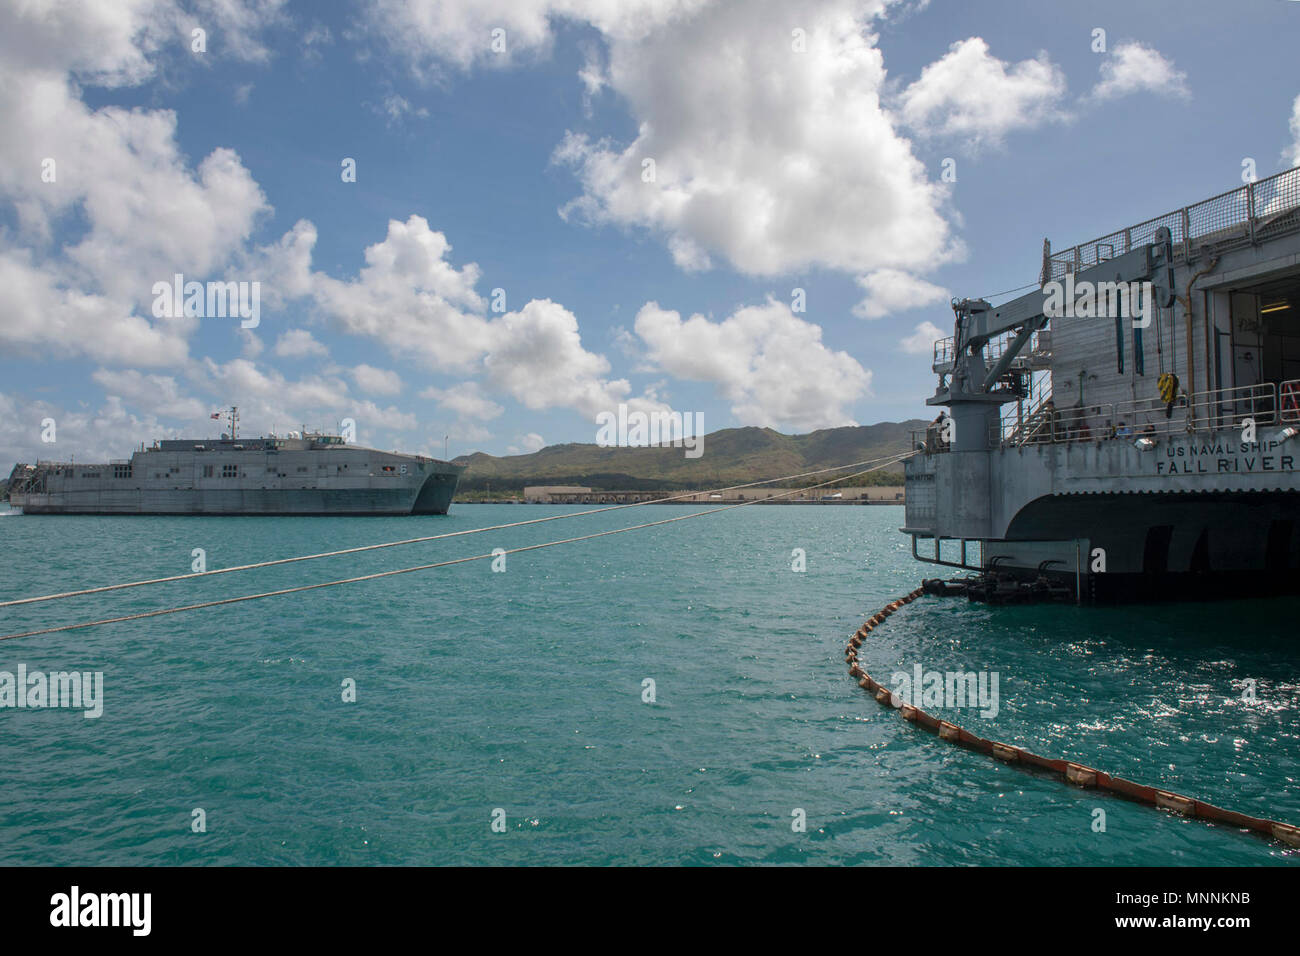 NAVAL BASE GUAM (March 16, 2018) Military Sealift Command expeditionary fast transport ship USNS Brunswick (T-EPF 6) approaches the port side of Military Sealift Command expeditionary fast transport ship USNS Fall River (T-EPF 4) as Brunswick prepares to moor in Guam in support of Pacific Partnership 2018 (PP18). PP18’s mission is to work collectively with host and partner nations to enhance regional interoperability and disaster response capabilities, increase stability and security in the region, and foster new and enduring friendships across the Indo-Pacific Region. Pacific Partnership, now Stock Photo